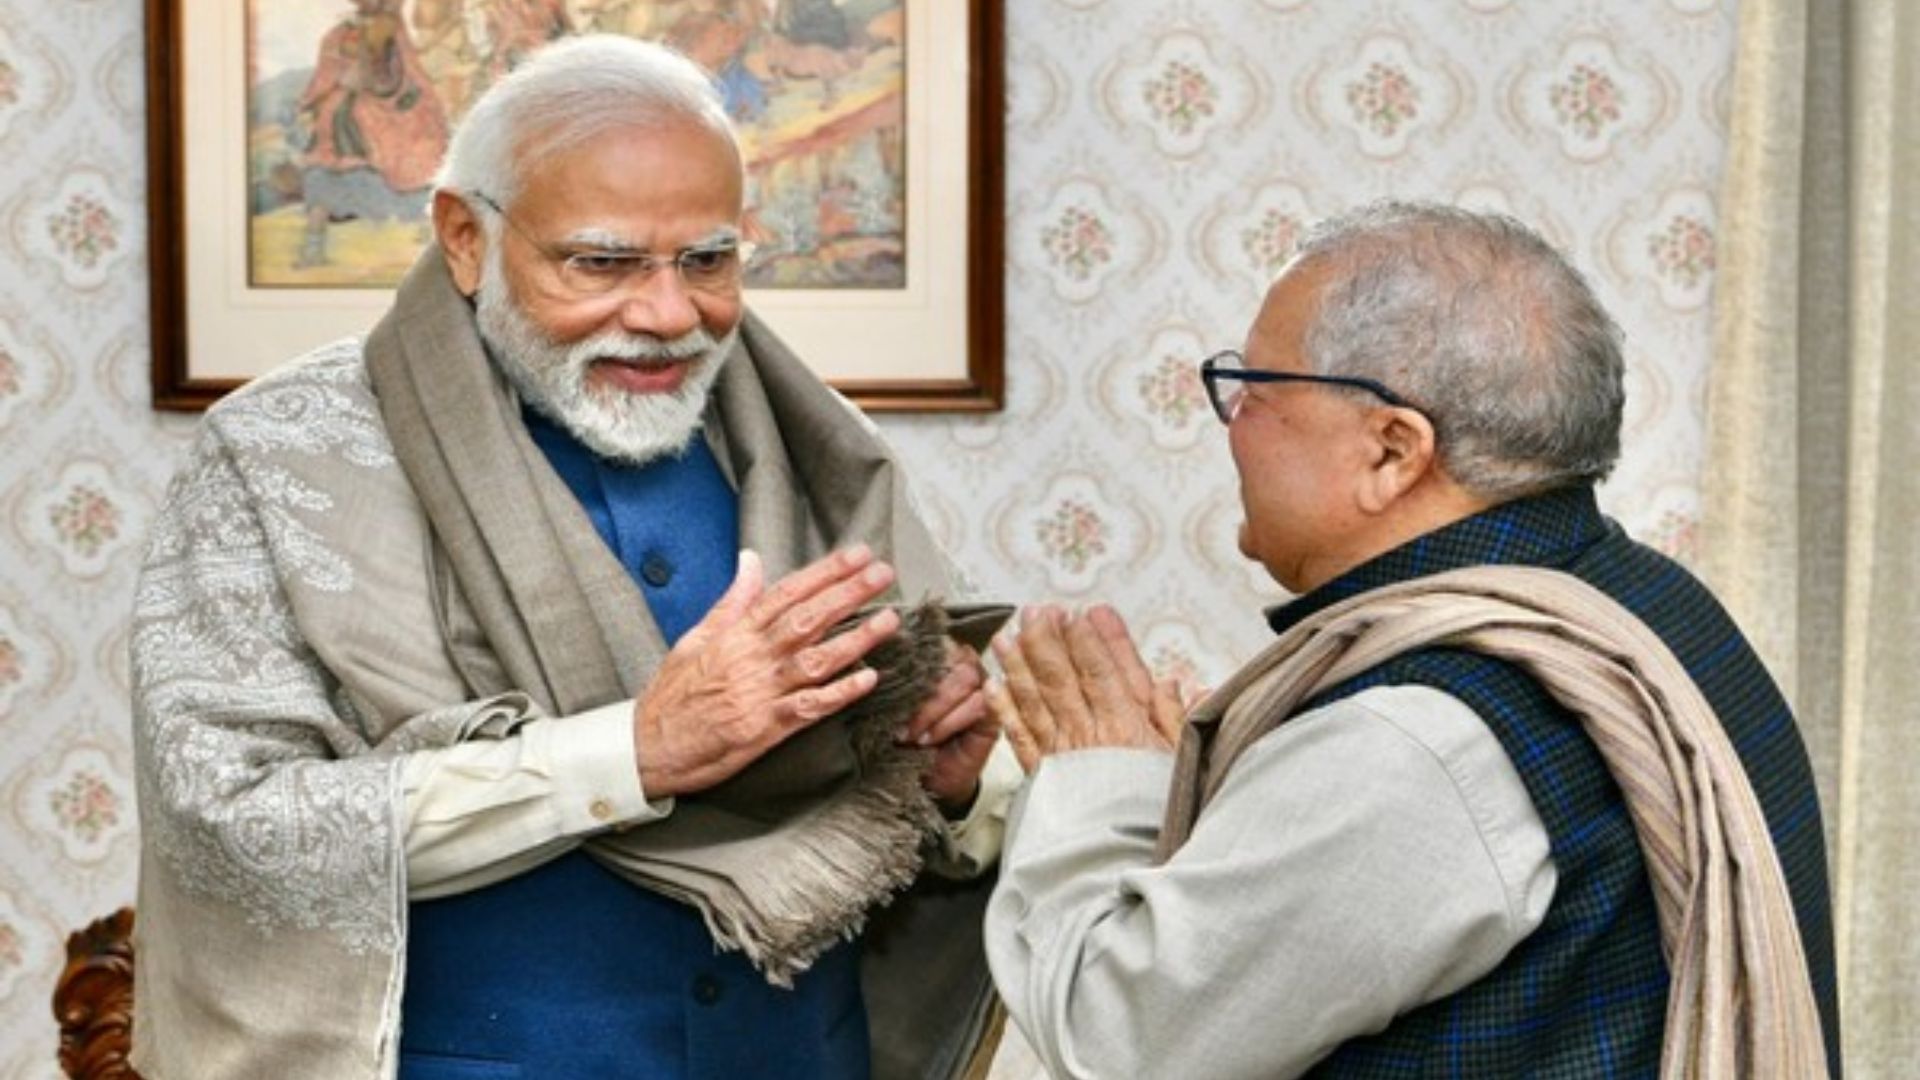 Rajasthan Governor calls on PM Modi in Jaipur; discusses several issues related to State’s development